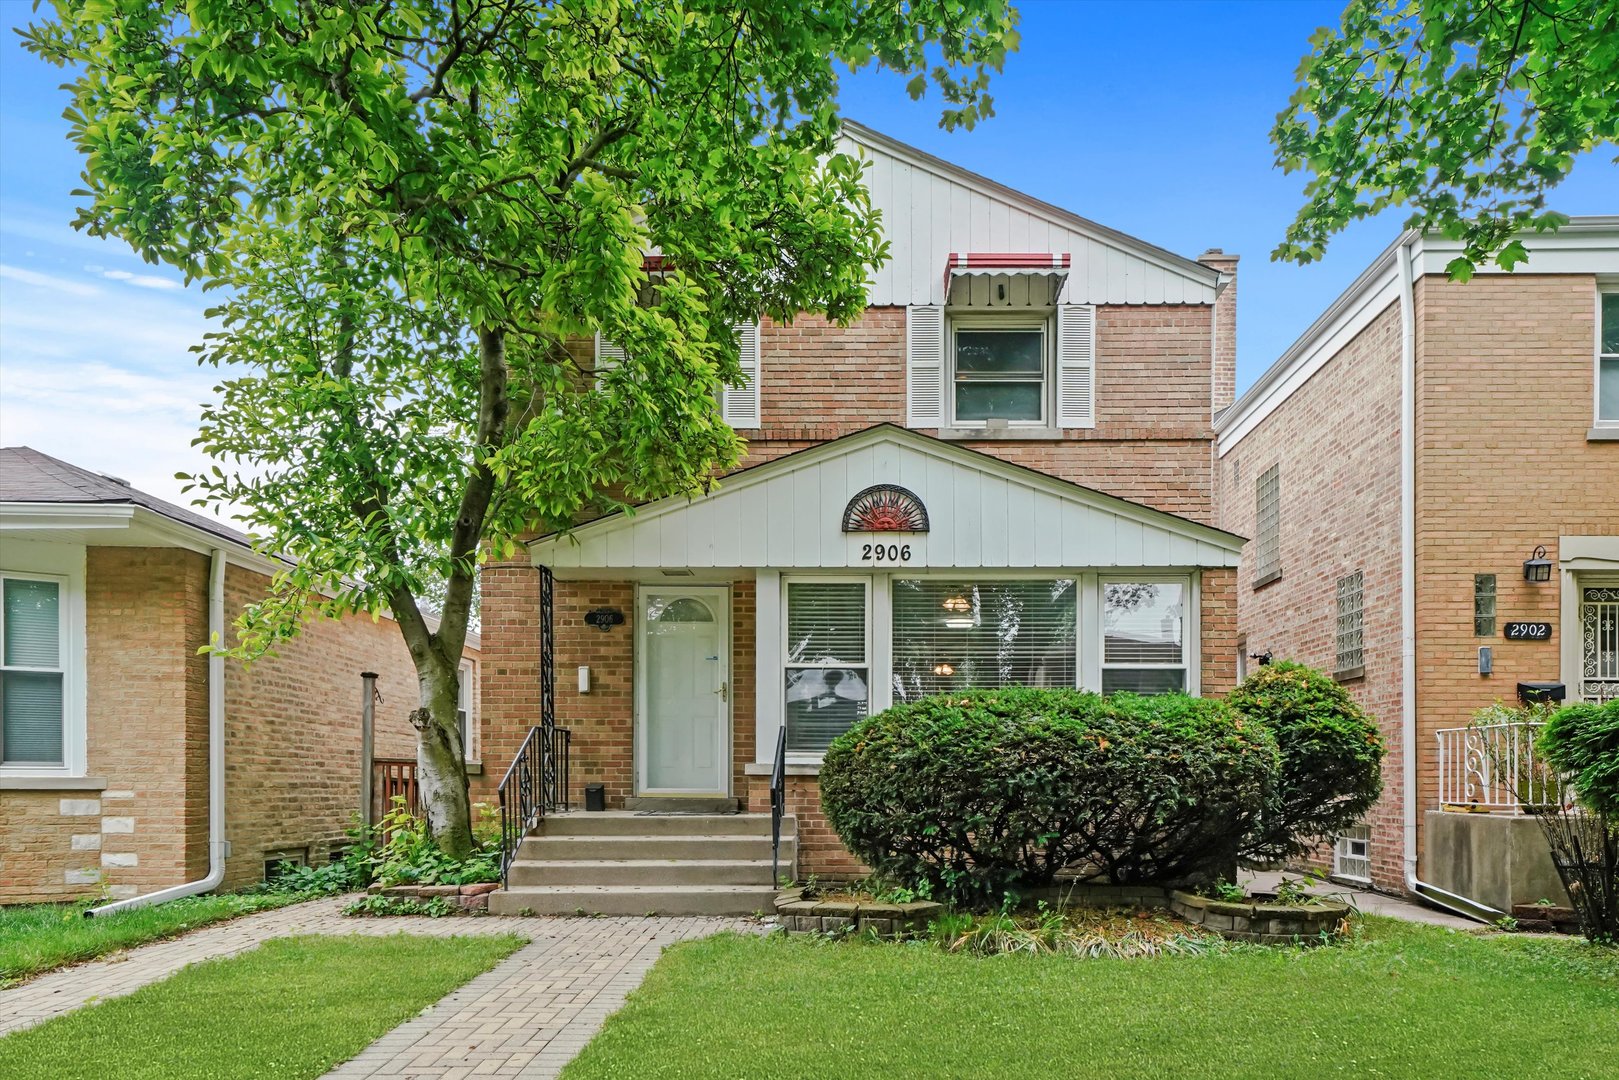 7530 N Oakley Ave, Chicago, IL 60645, MLS# 11868780